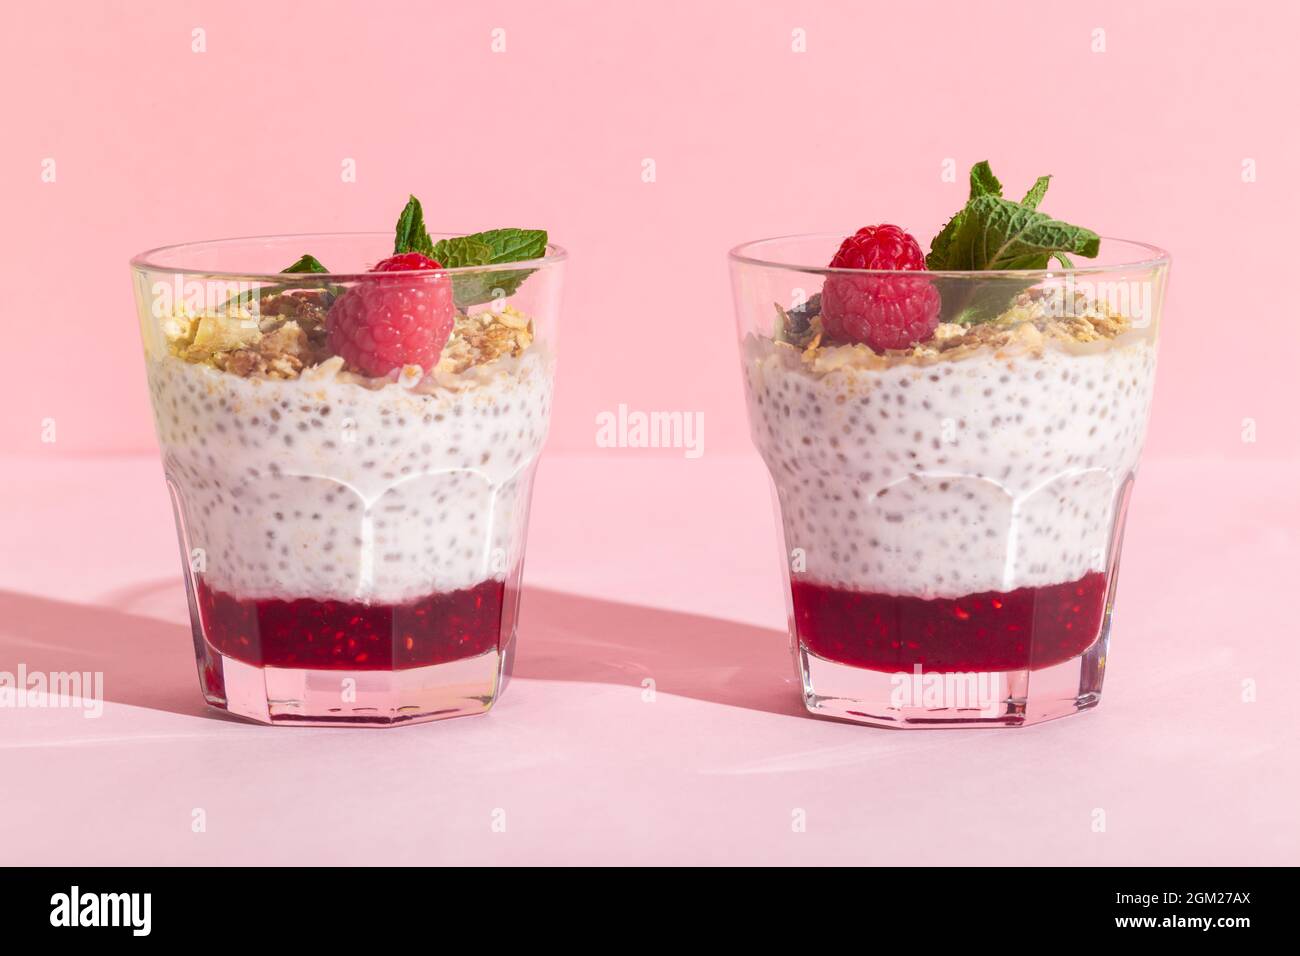 Chia seeds vanilla pudding with raspberry, oats musli and mint on rose hard shadow Stock Photo